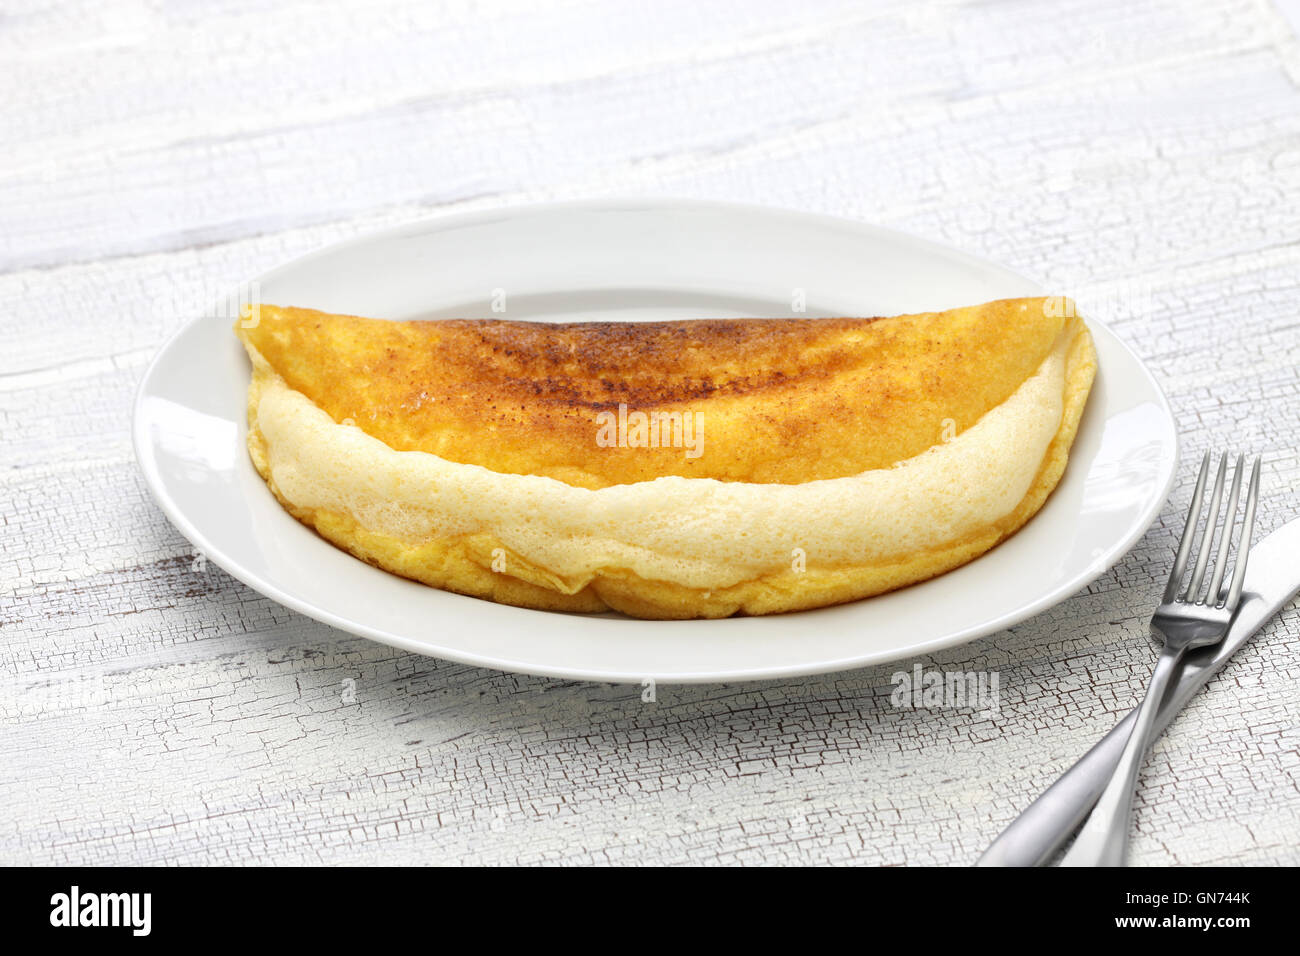 homemade mont saint michel style fluffy souffle omelet Stock Photo